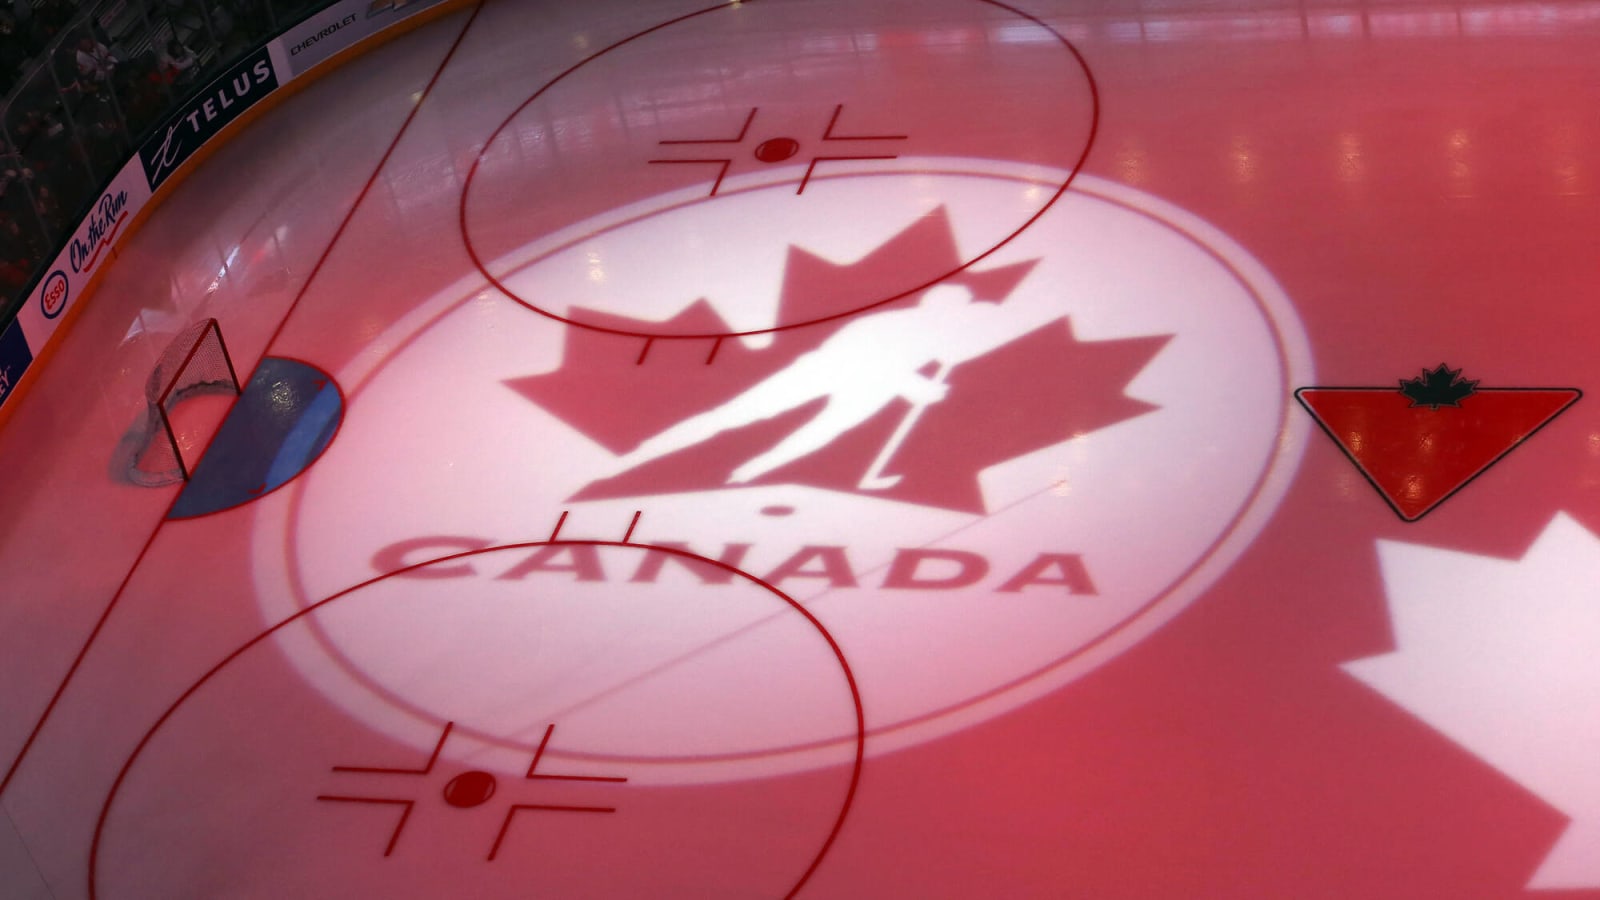 Hockey Canada execs double down on defiance in hearings